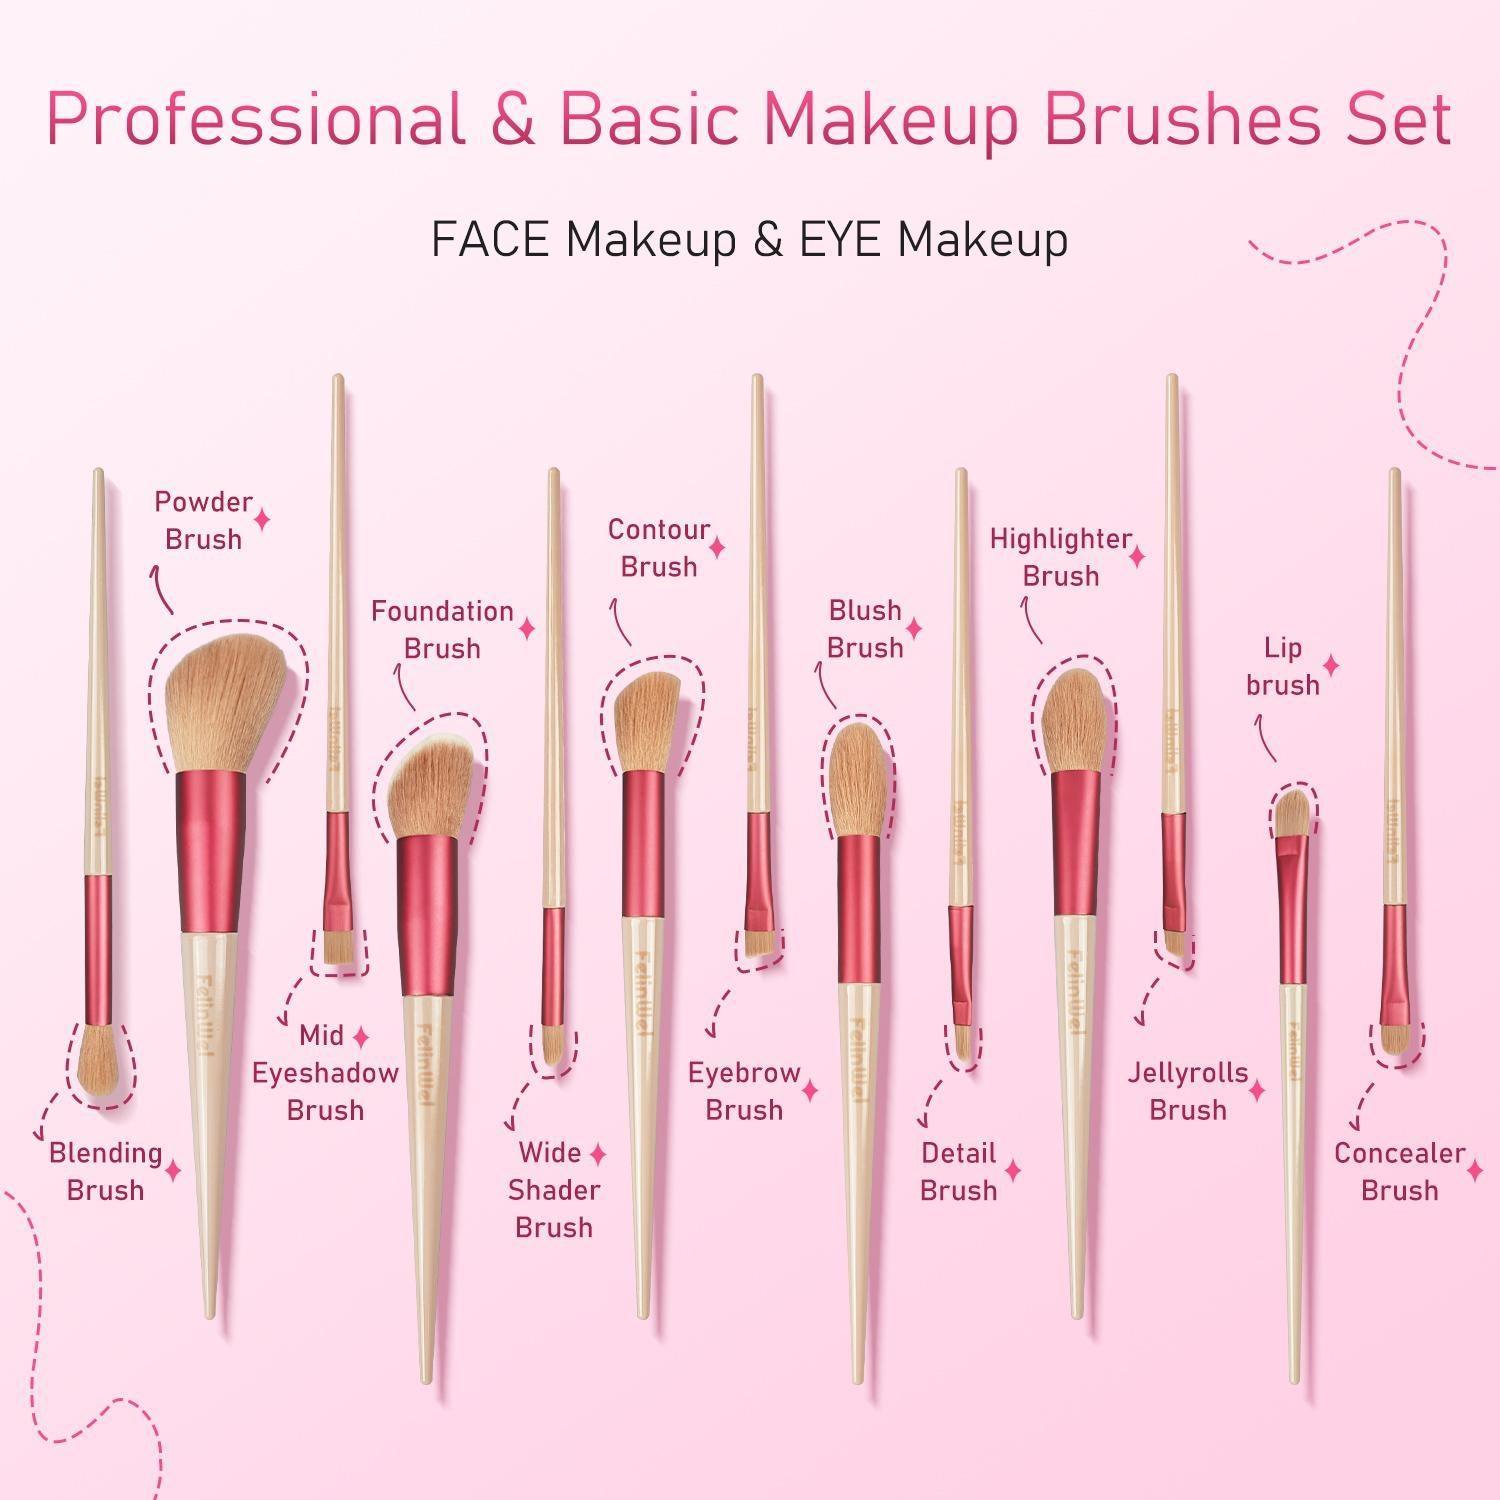 Makeup brushes THE GUIDE: How to choose the right ones - Beauty Collective